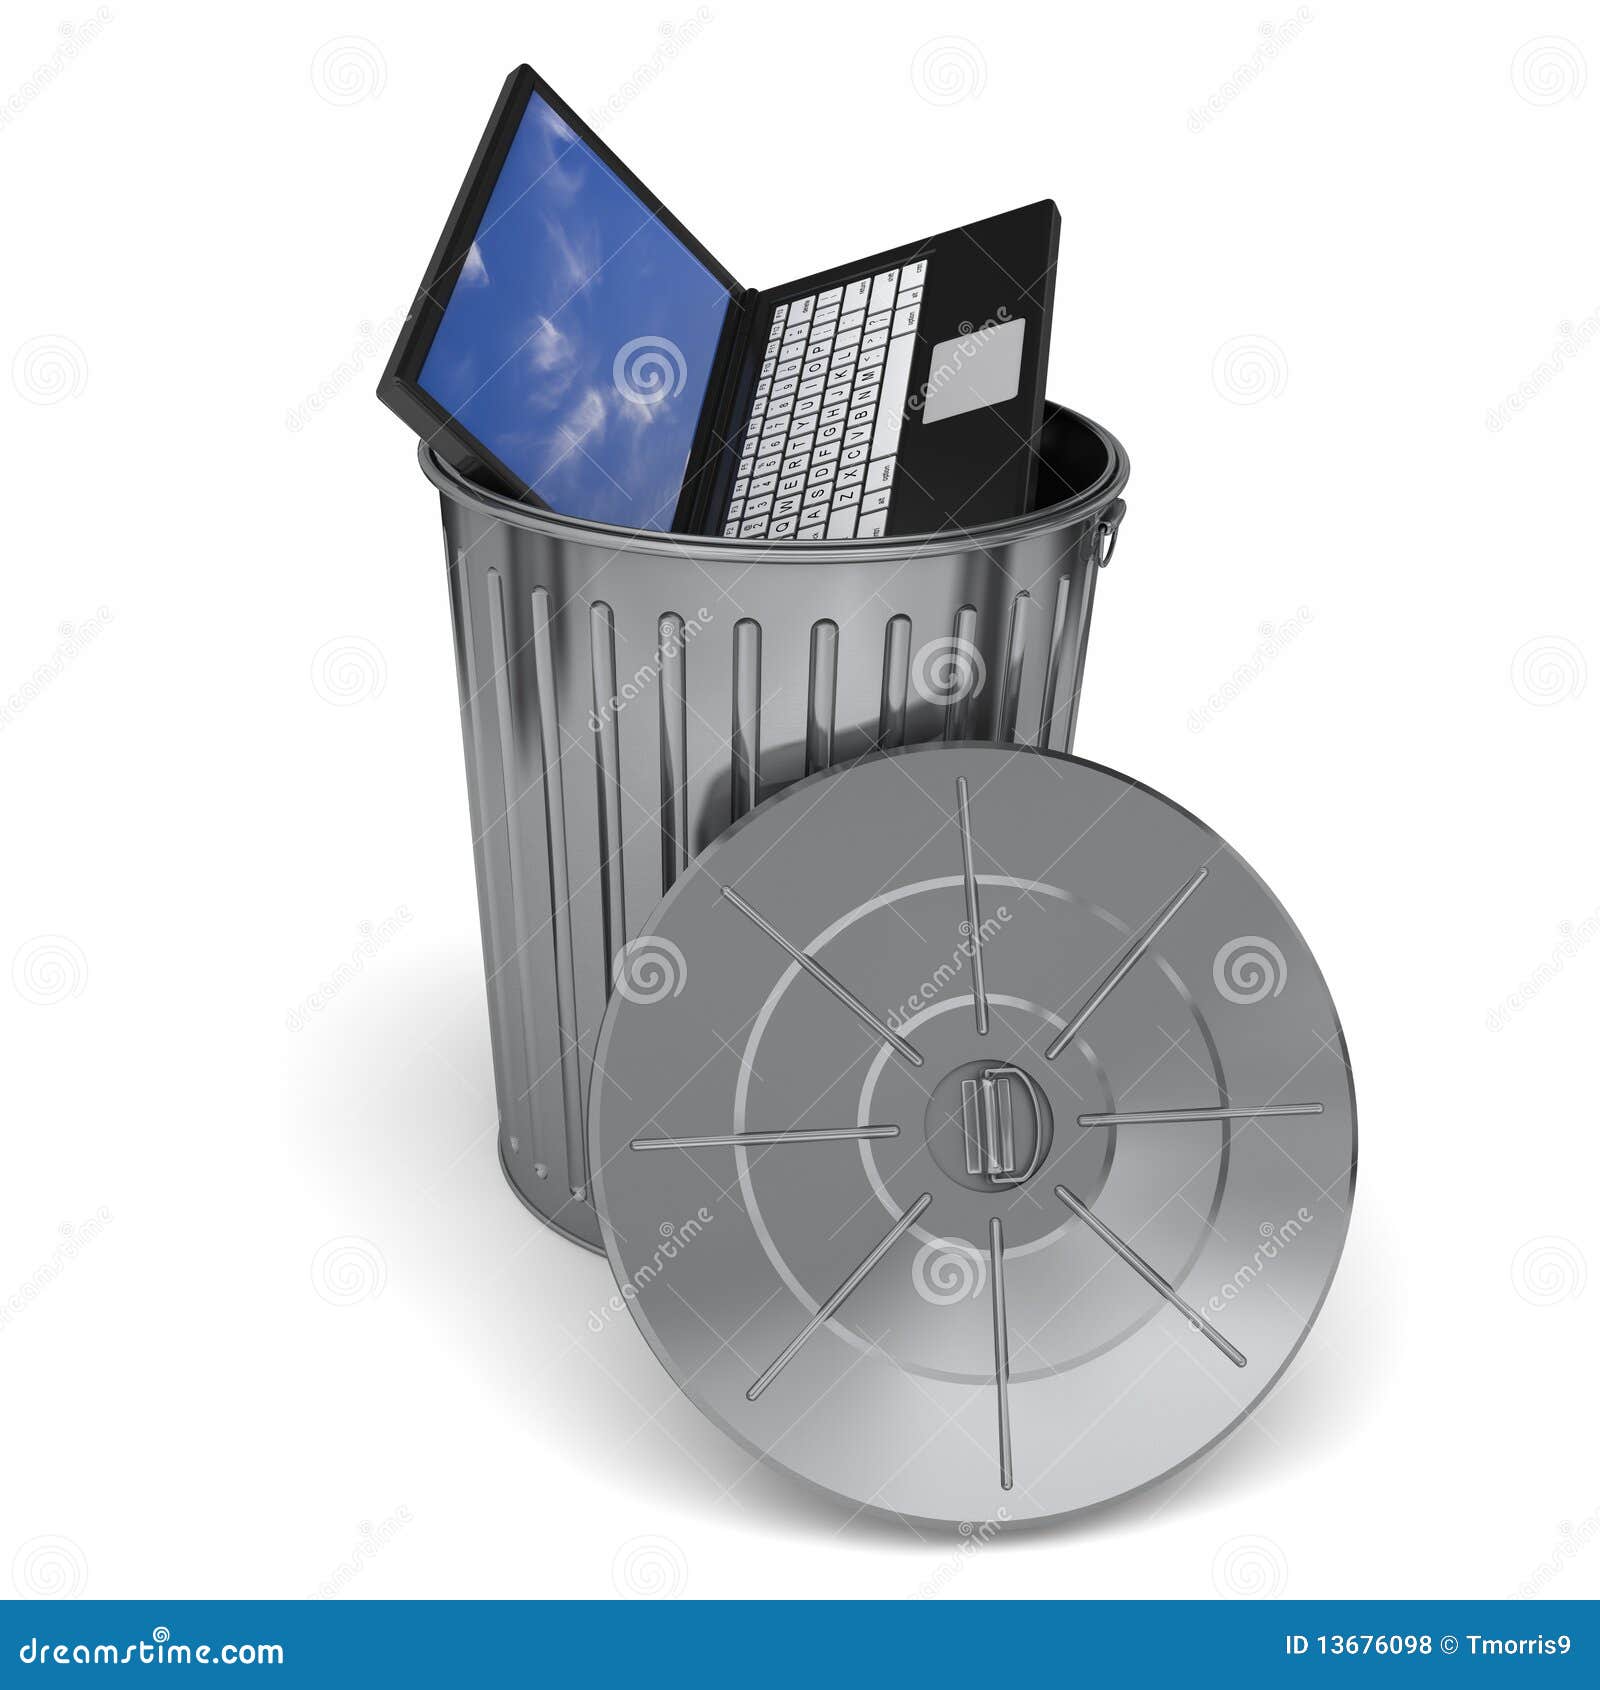 6,243 Trash Can Computer Images, Stock Photos, 3D objects, & Vectors